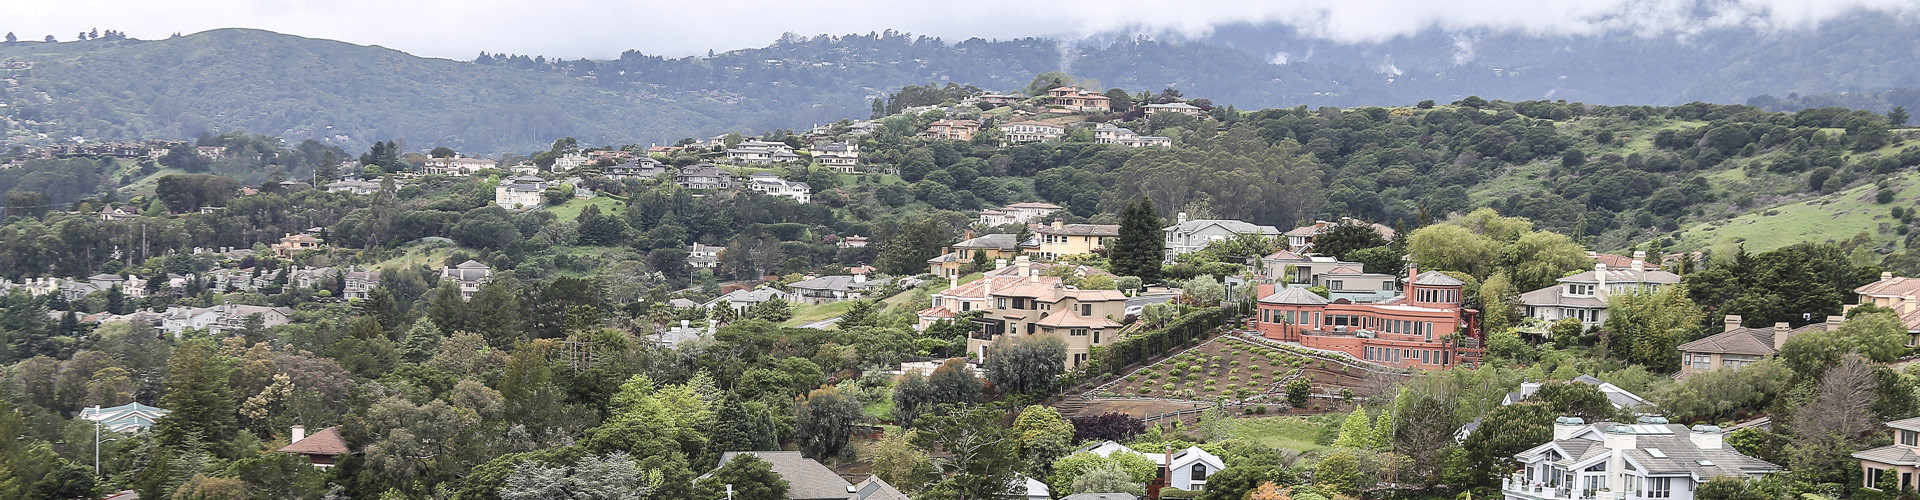 Aerial view of Tiburon homes on green hills